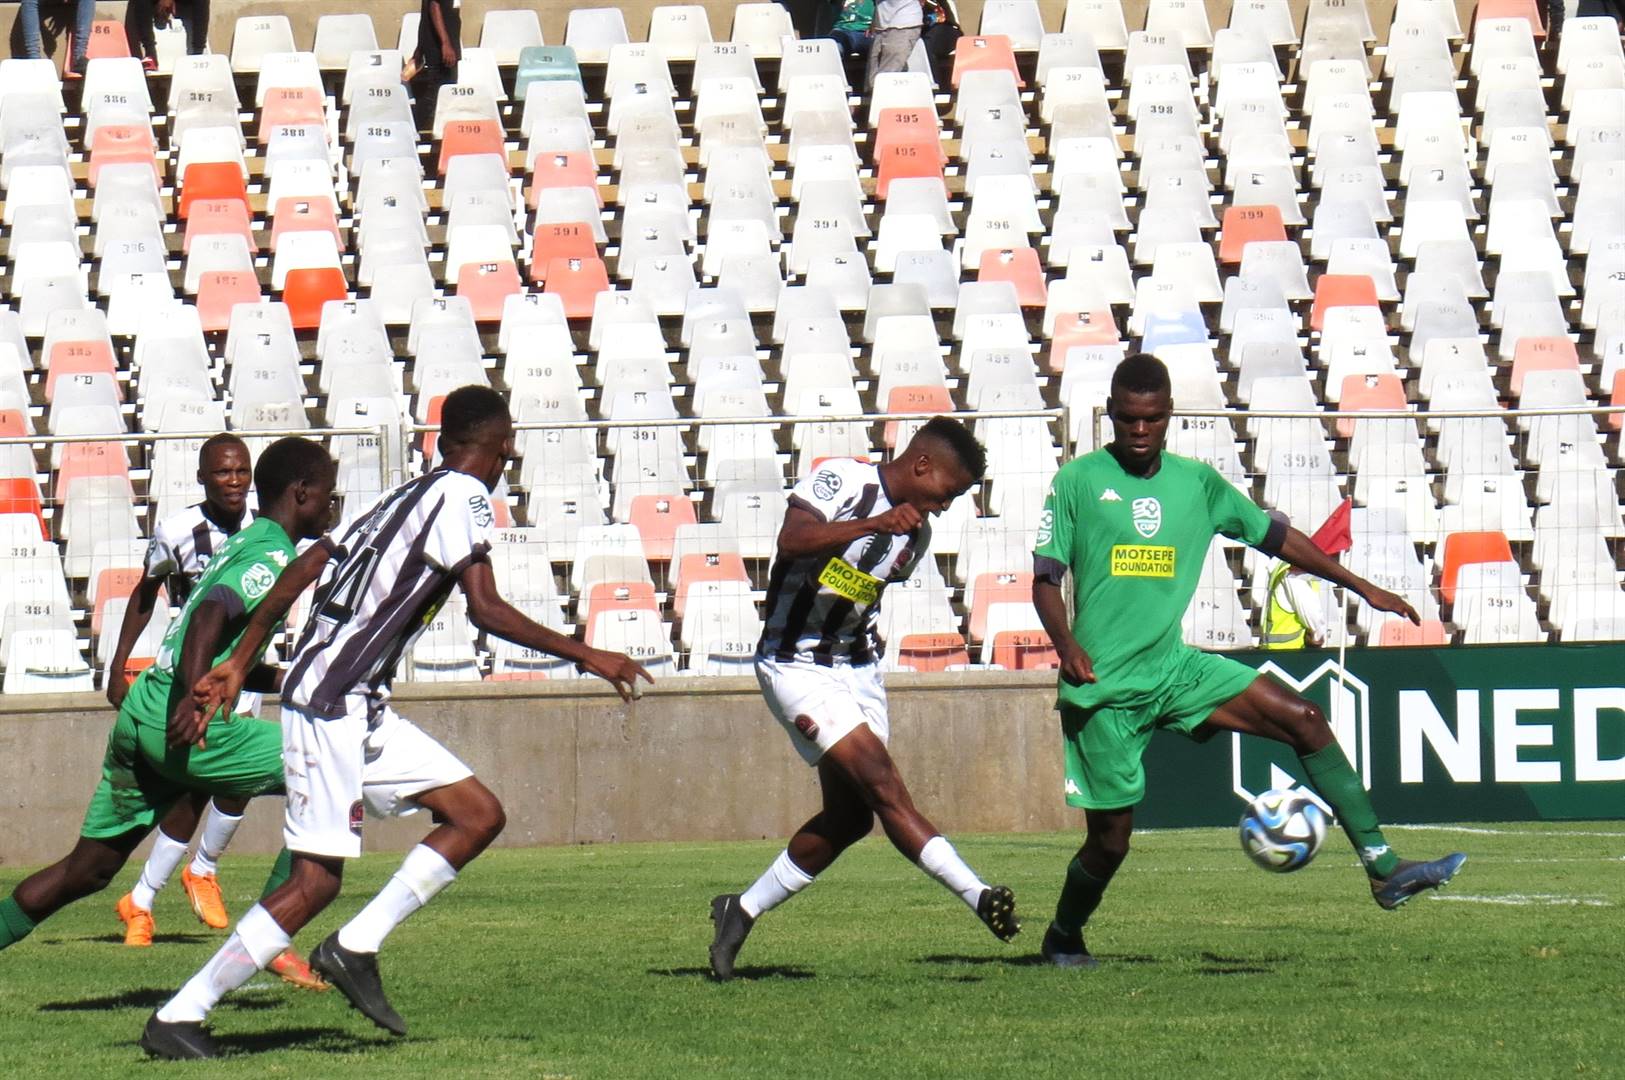 D’ General goal poacher Tladi Makhetha (in the black and white) scores a killer goal against the Limpopo-based Madridtas FC in the Nedbank Cup last-32 group fixure at the Toyota Stadium in Bloemfontein yesterday, on Sunday, 25 February. The striker beat opponent Rinaye Madzhuta (green) before scoring the second goal in the match.  Photo: Teboho Setena